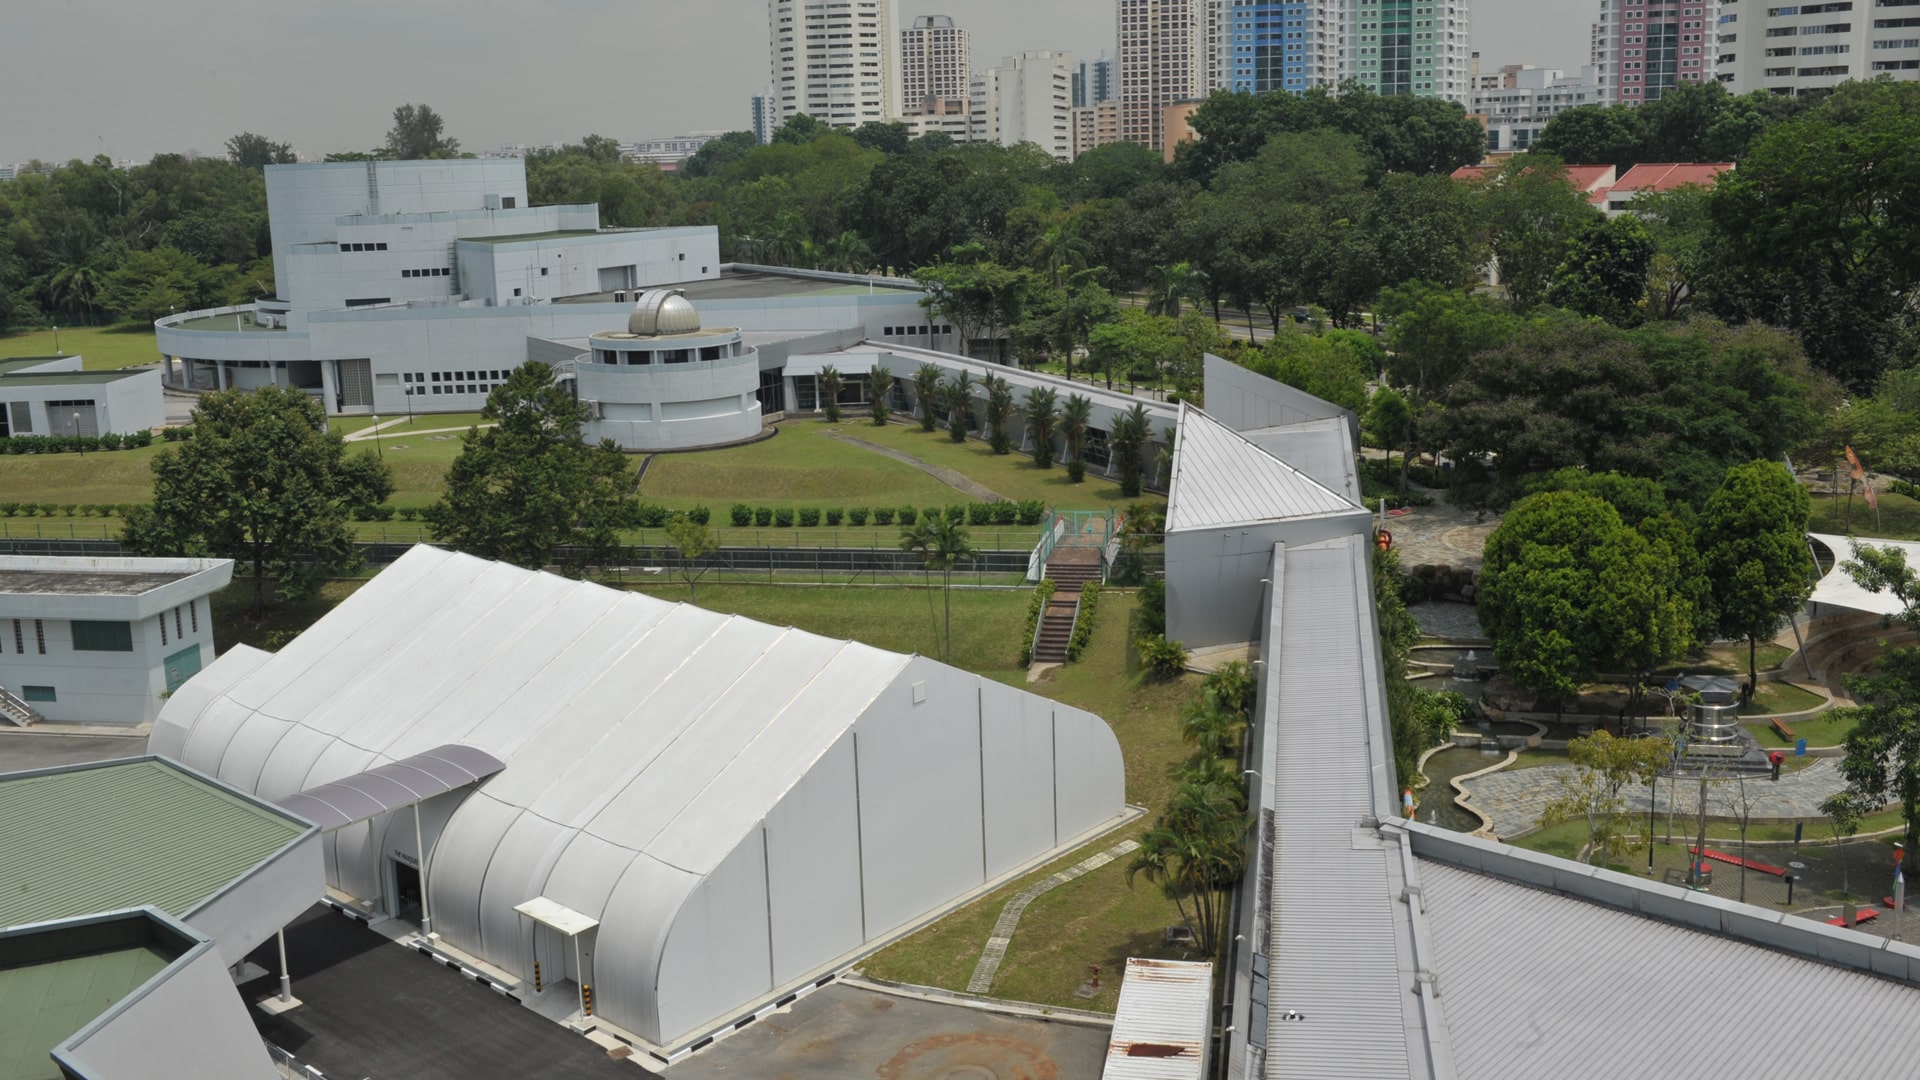 tsc_opt-images_mega-structures_singapore-science-center-marquee-1920x1080-03-min